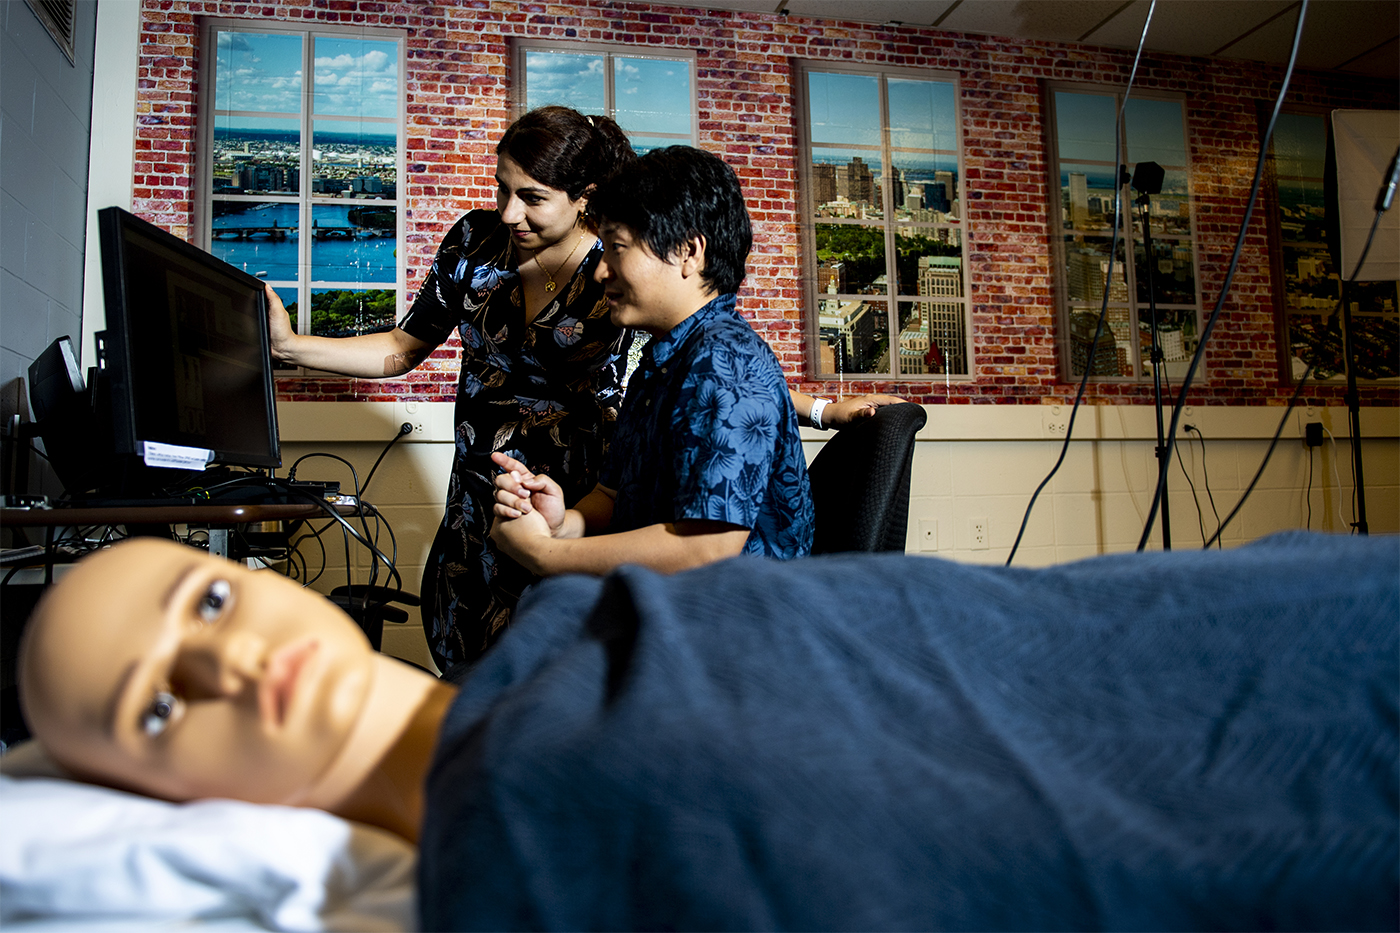 Sarah Ostadabbas, an assistant professor of electrical and computer engineering, and doctoral student Shuangjun Liu use a manikin to test their camera setup. Photo by Ruby Wallau/Northeastern University